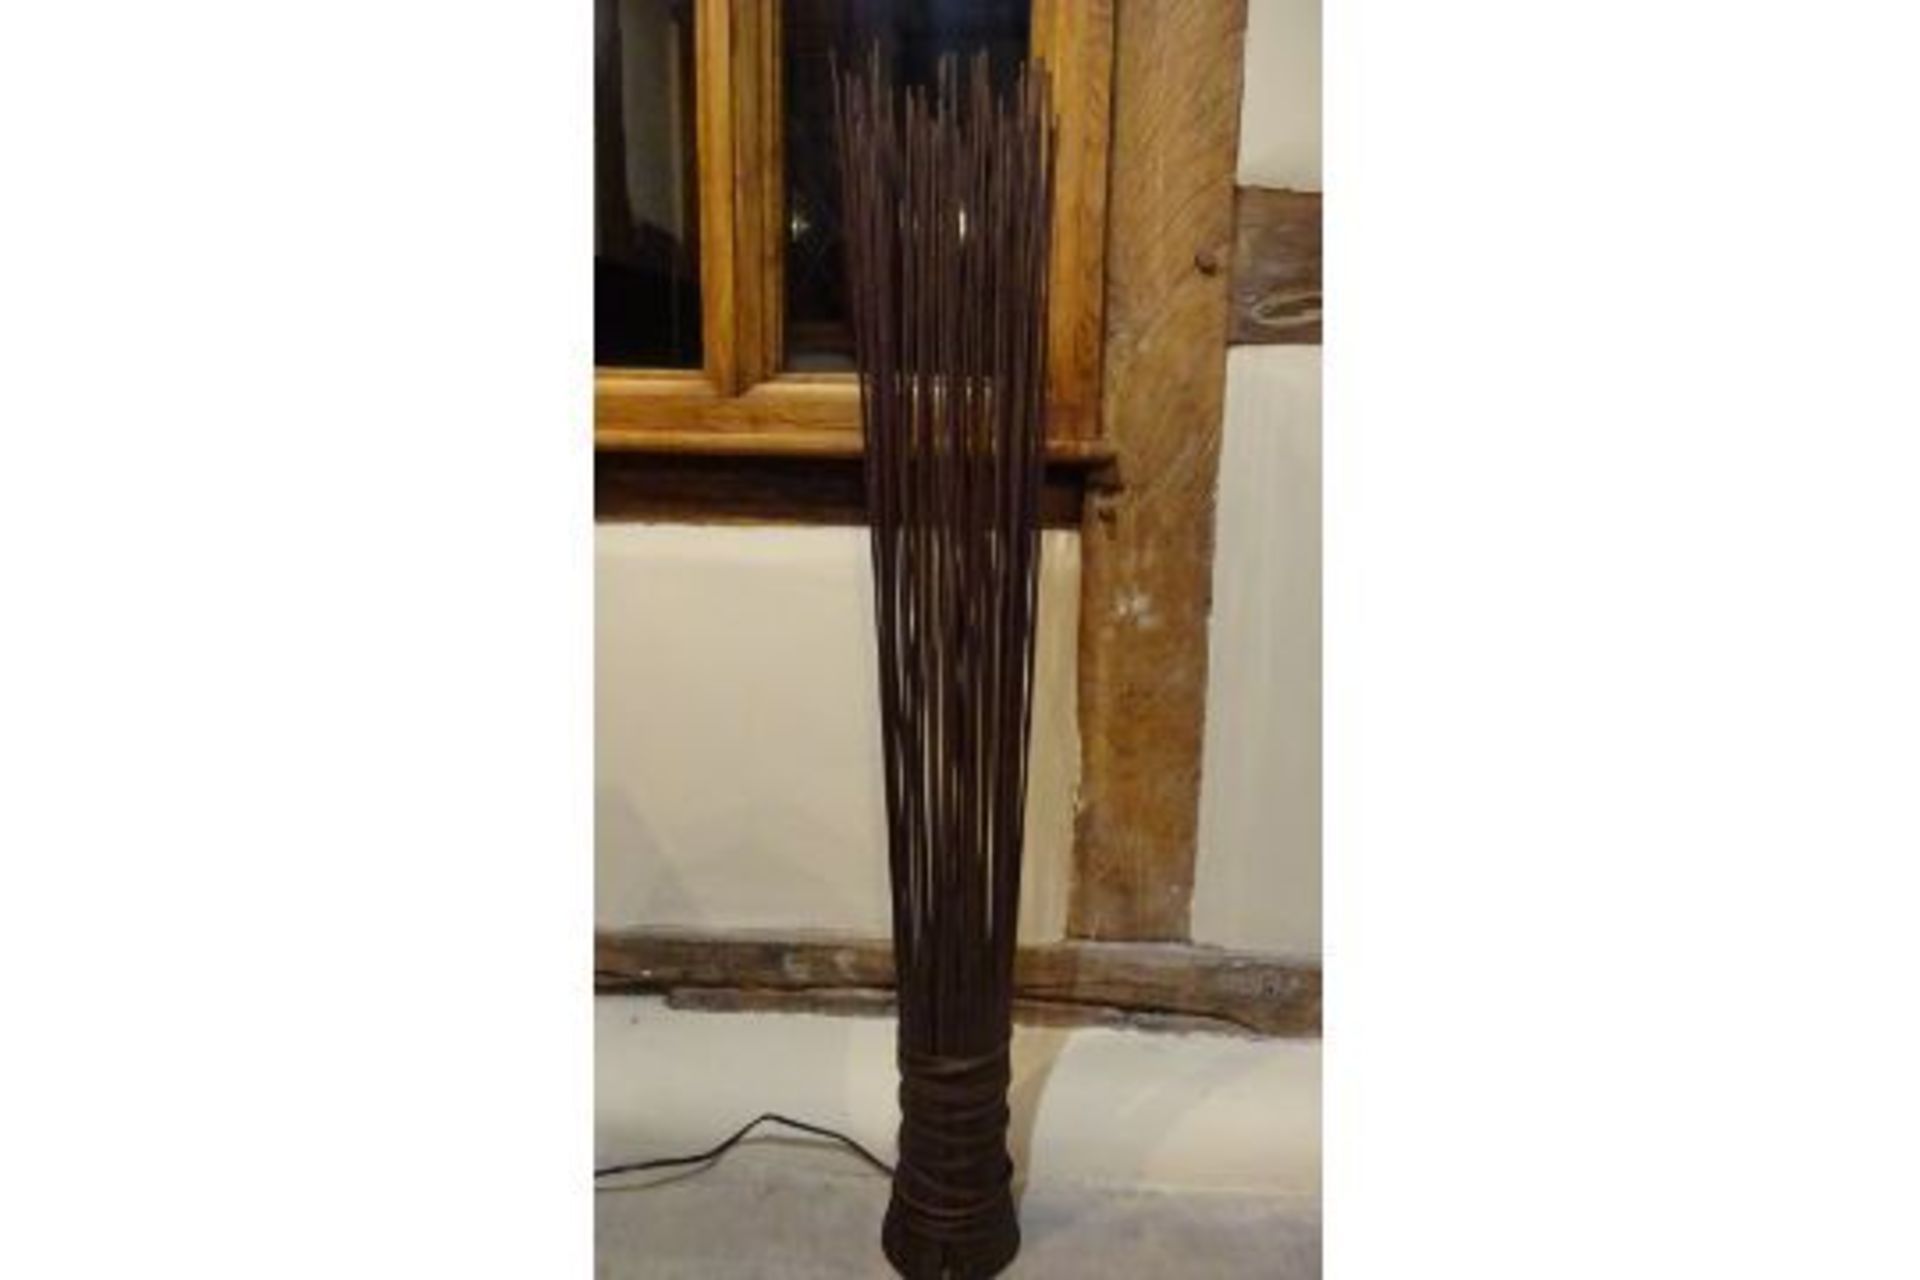 NEW BROWN BAMBOO INDOOR LIGHT 100CM TALL - RRP £29.99. - Image 2 of 2